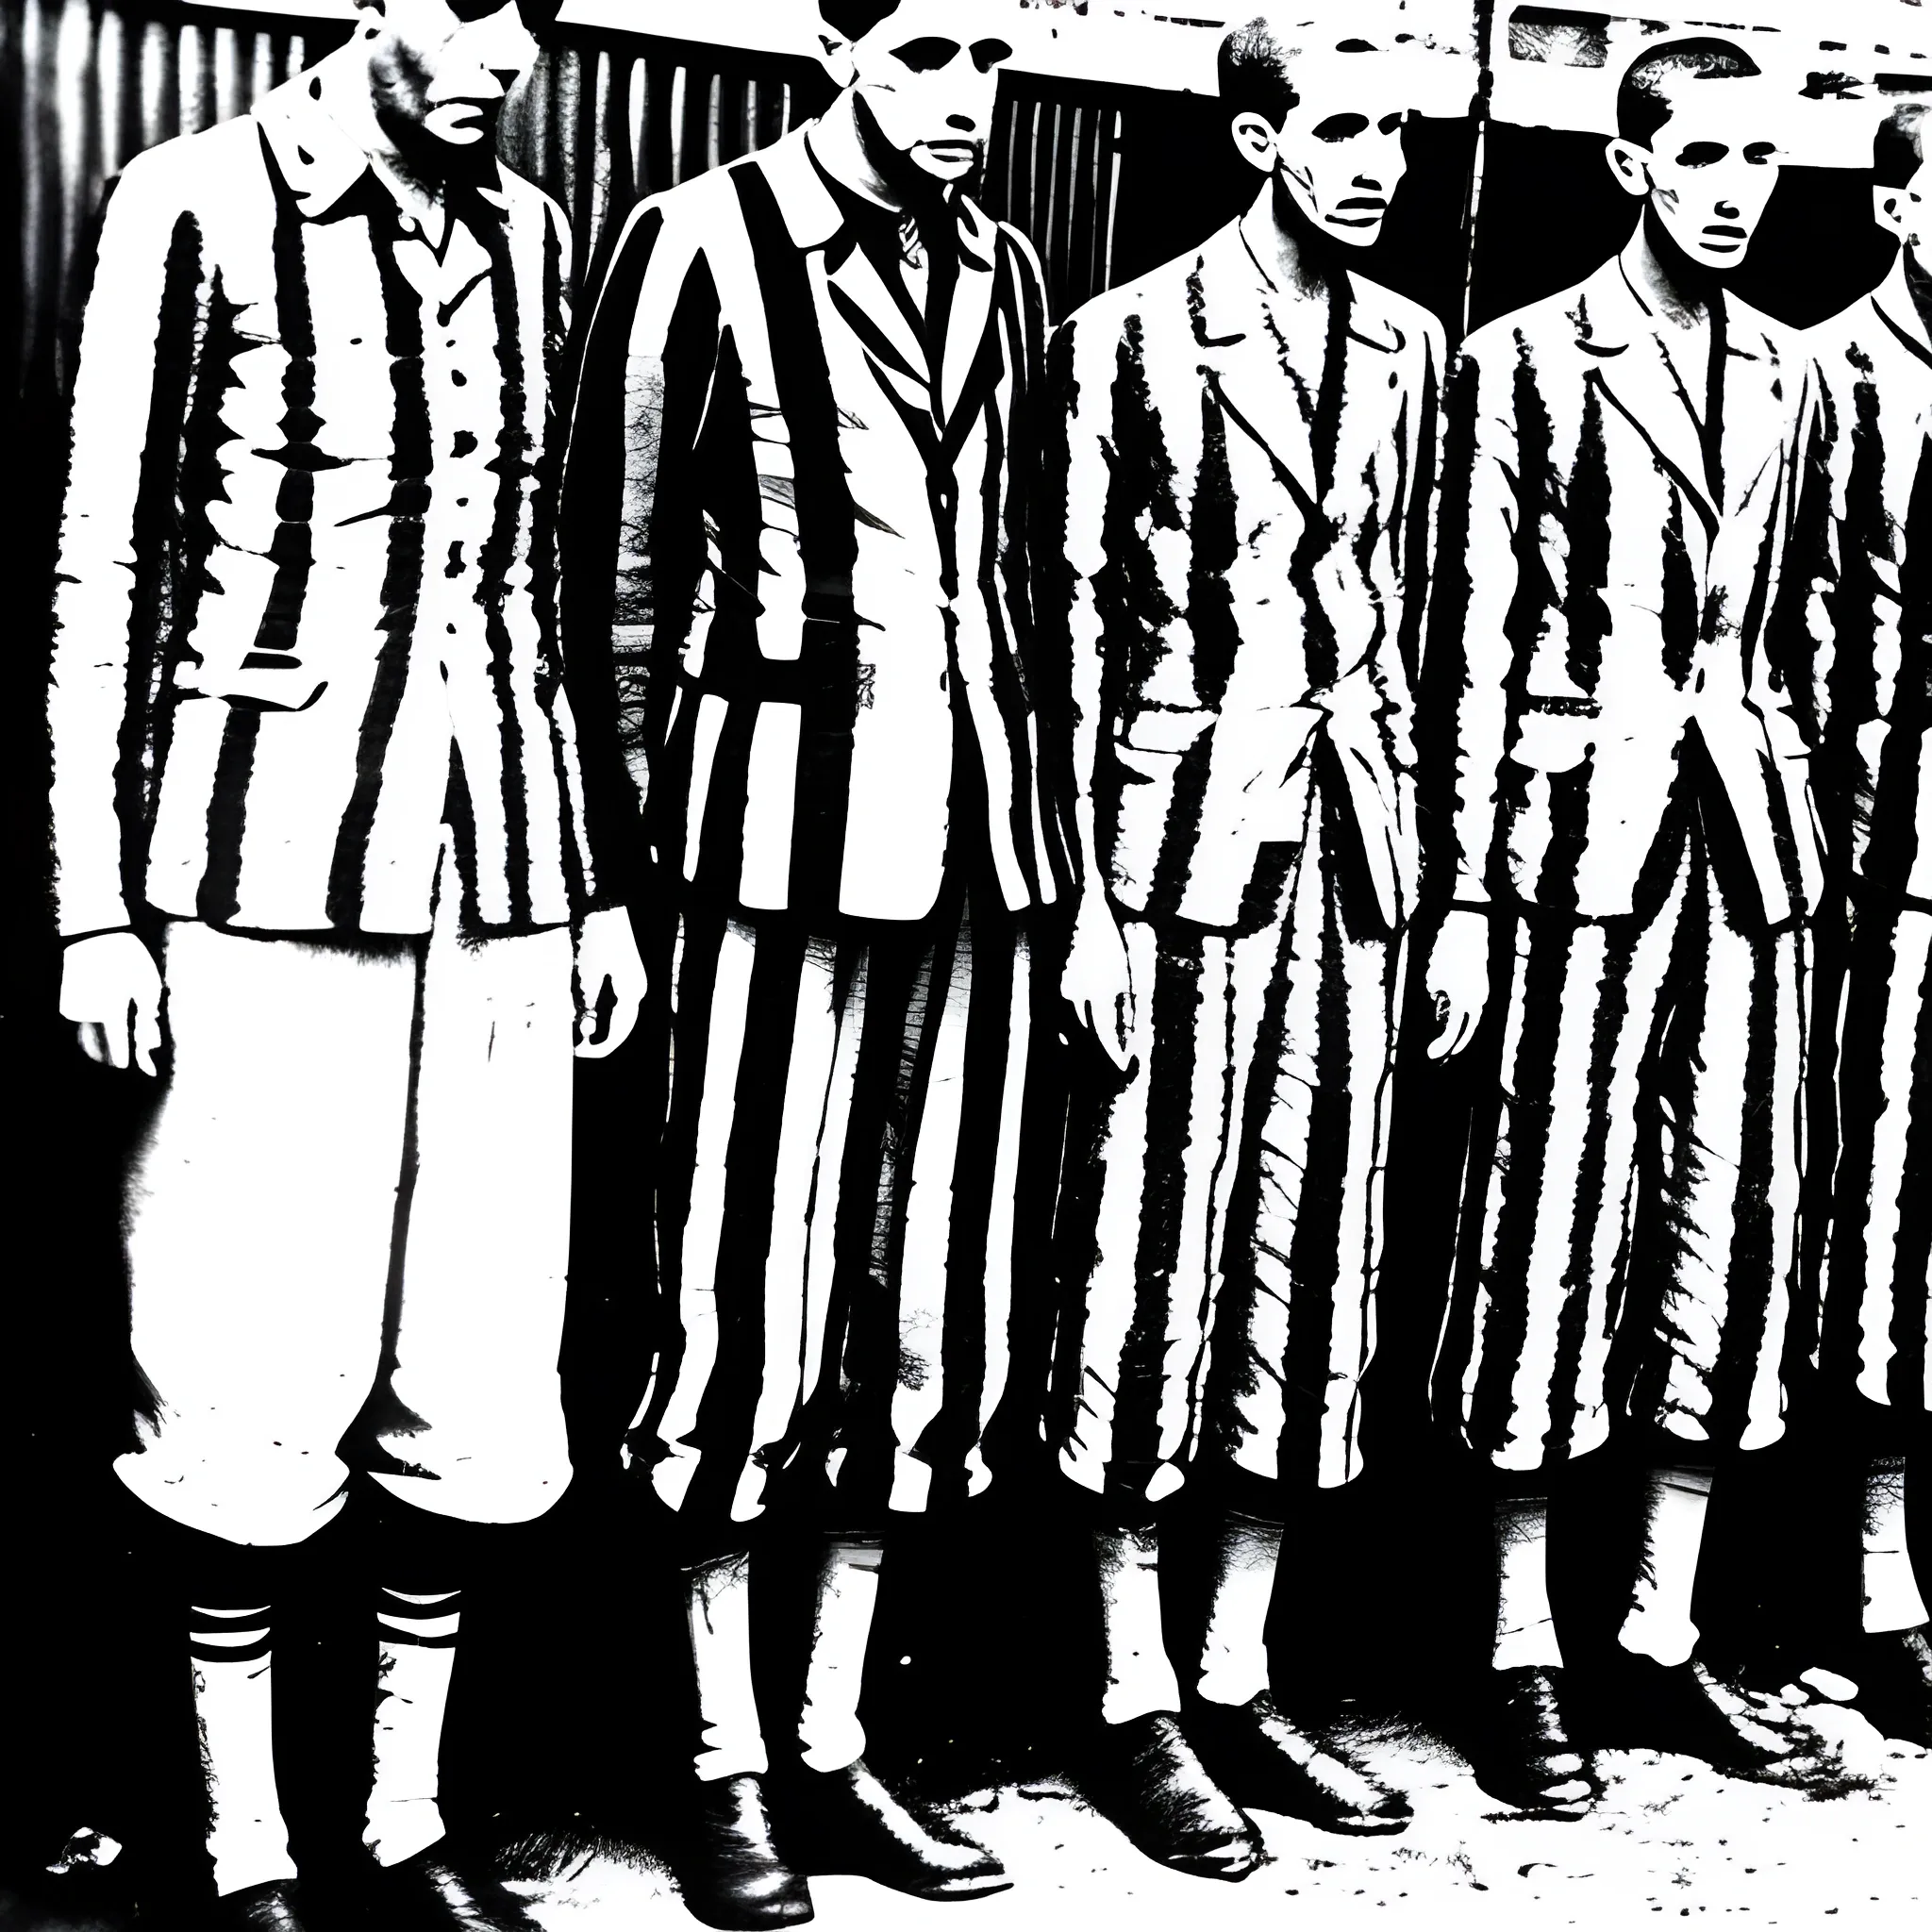 The horror of the Holocaust. Prisoners in striped suits, very thin, next to barbed wire fences in a concentration camp.